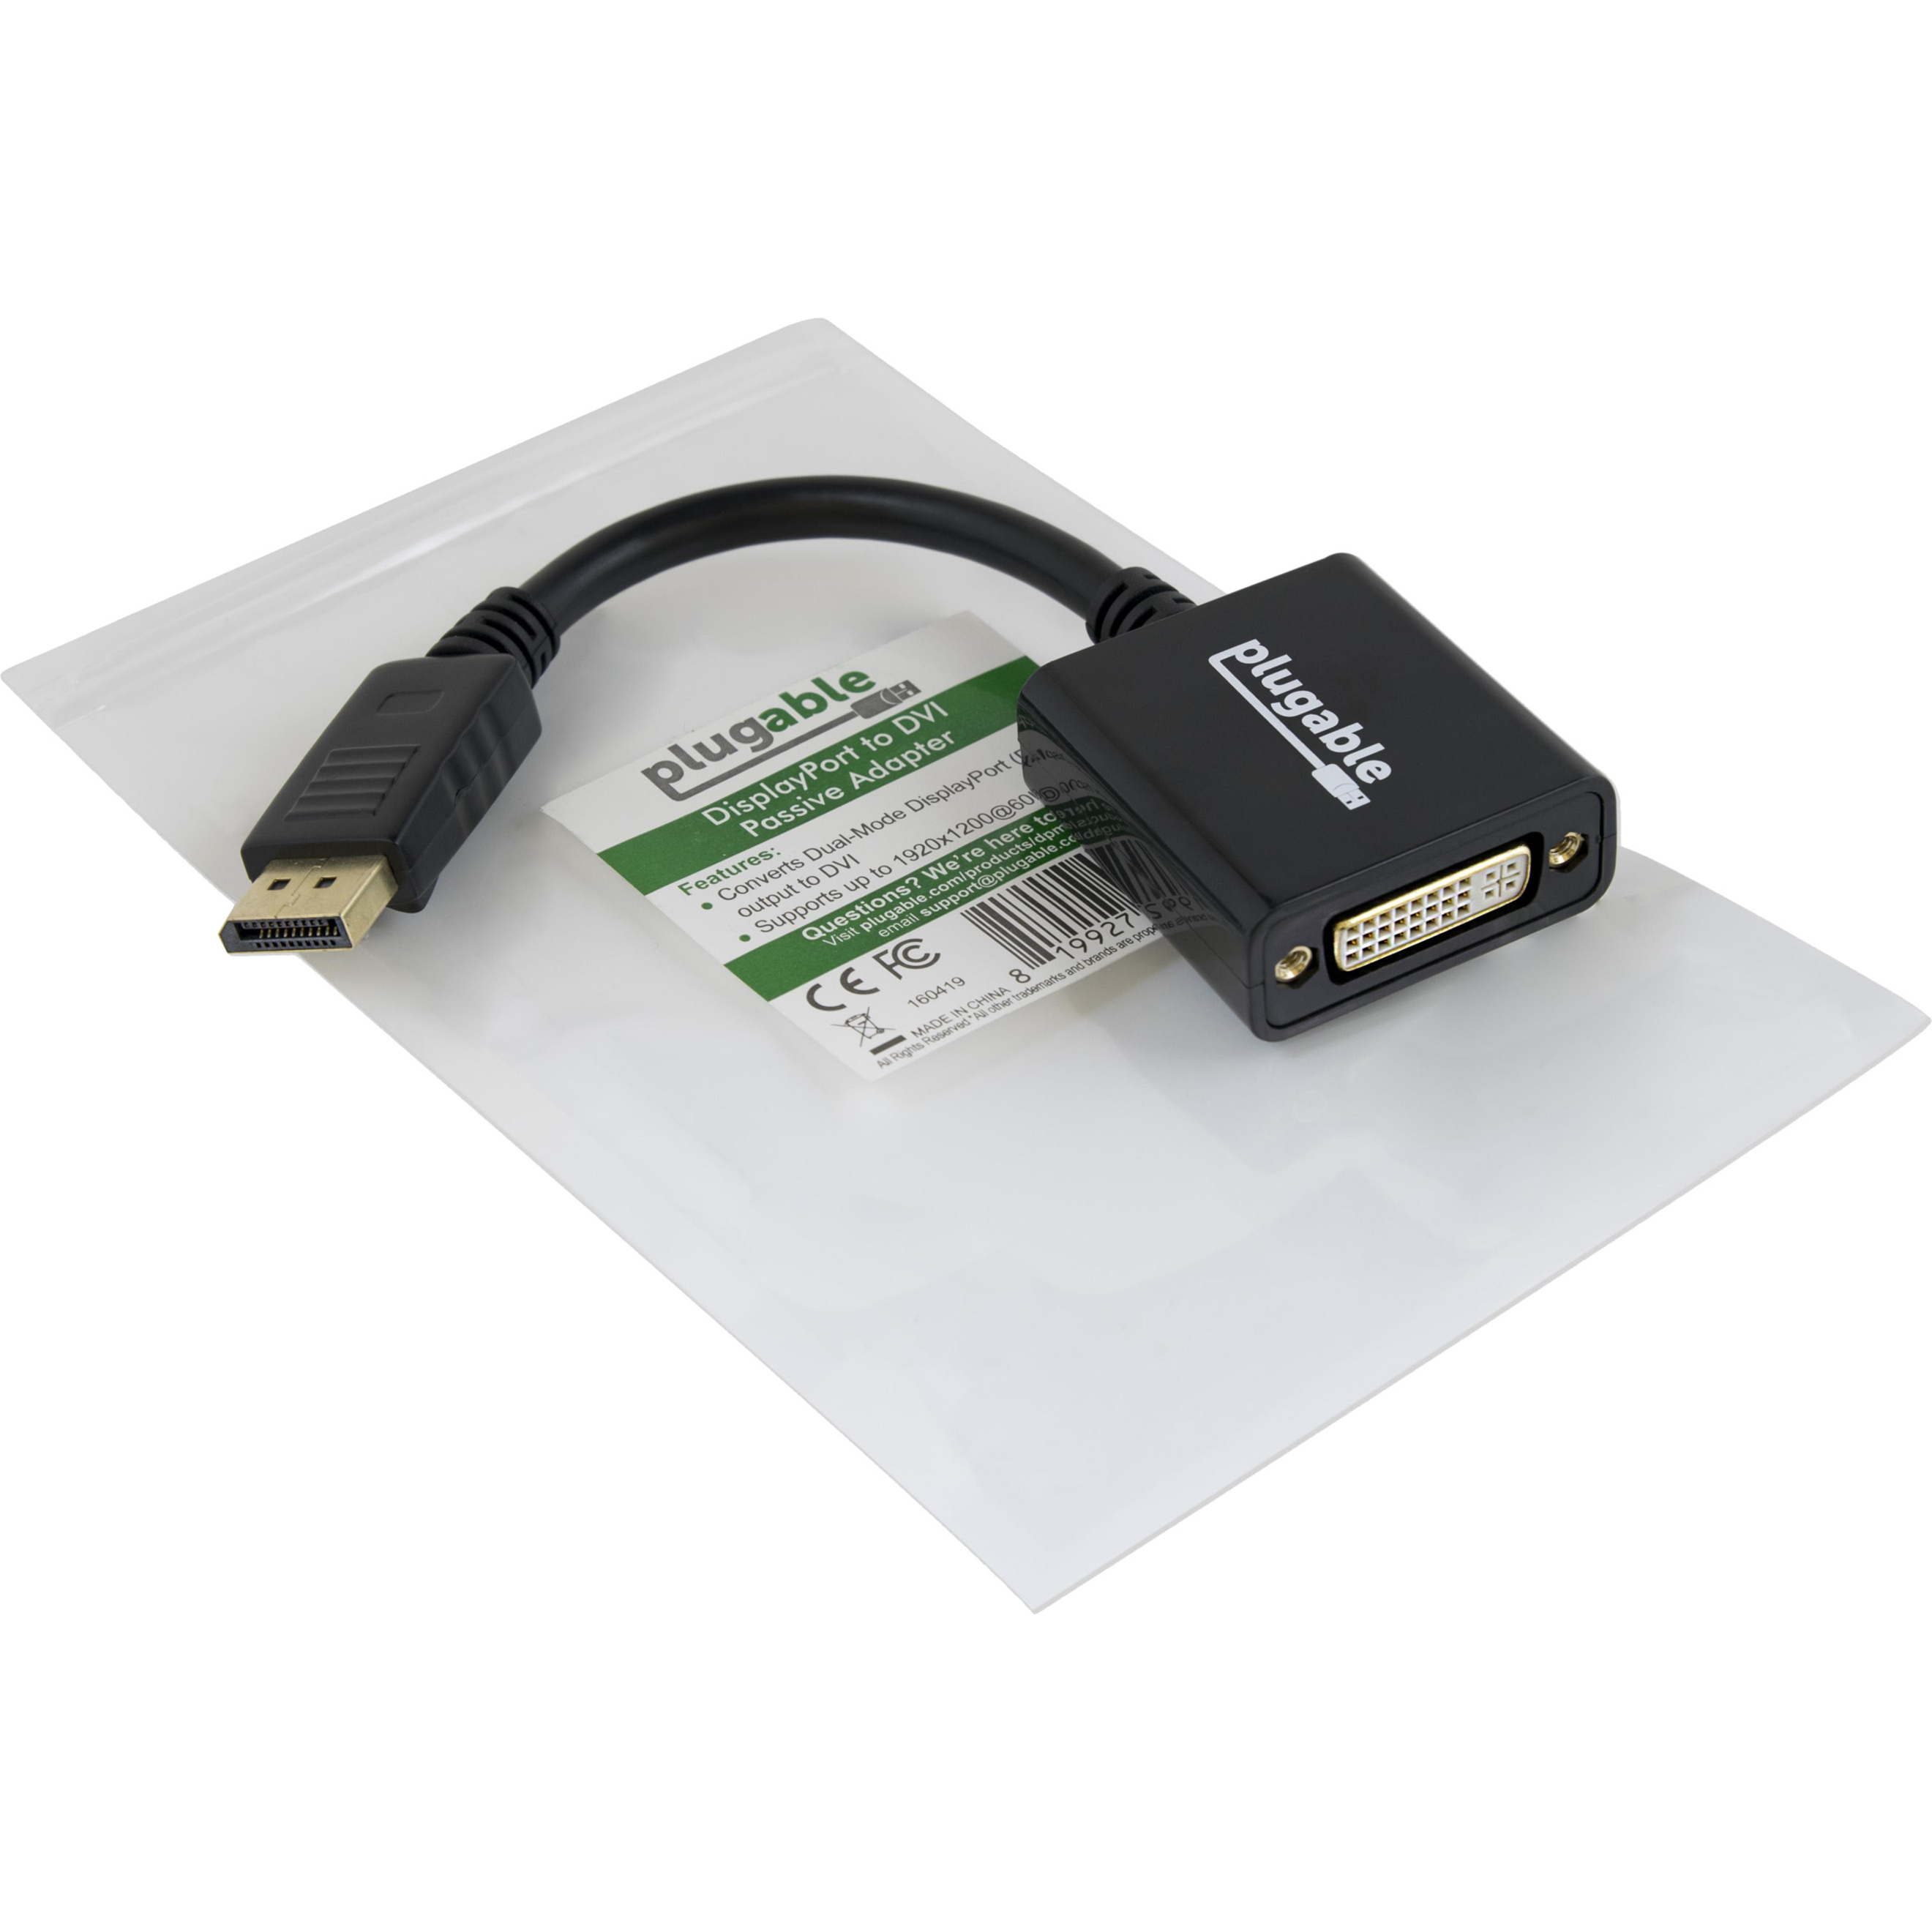 Plugable DisplayPort to DVI Adapter (Supports Windows and Linux Systems and Displays up to 1920x1200@60Hz, Passive) - image 4 of 5